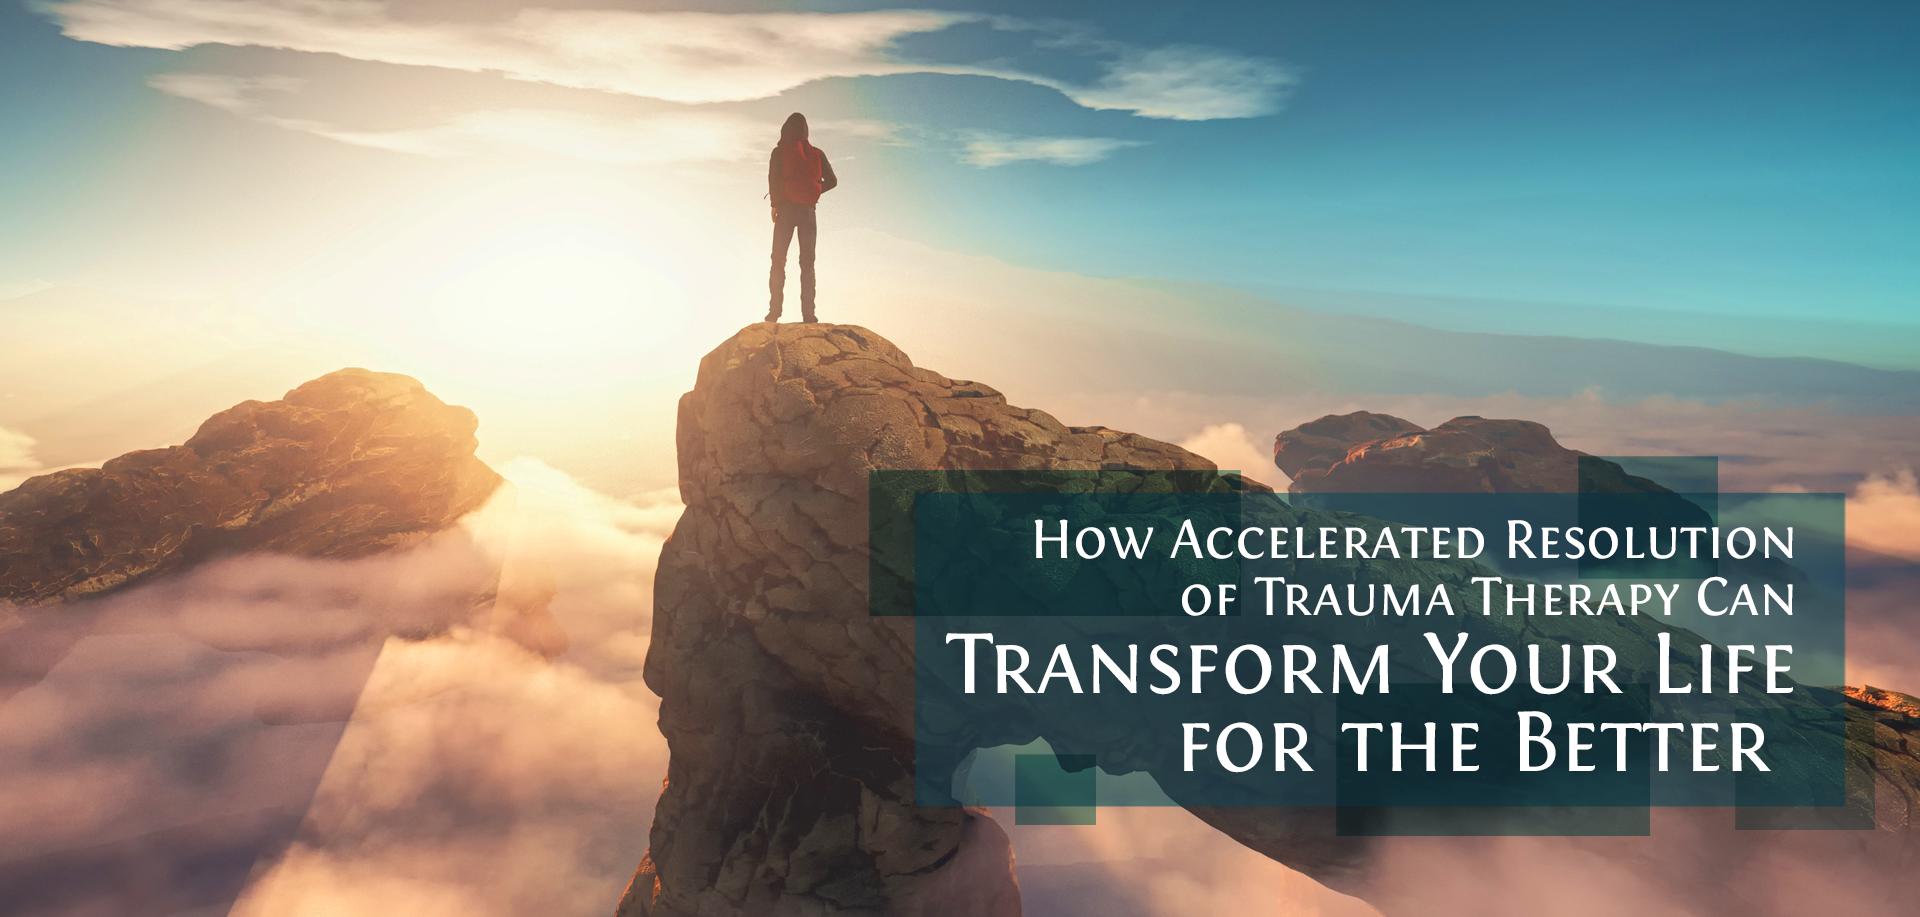 Man on mountain with text How Accelerated Resolution of Trauma Therapy Can Transform Your Life for the Better